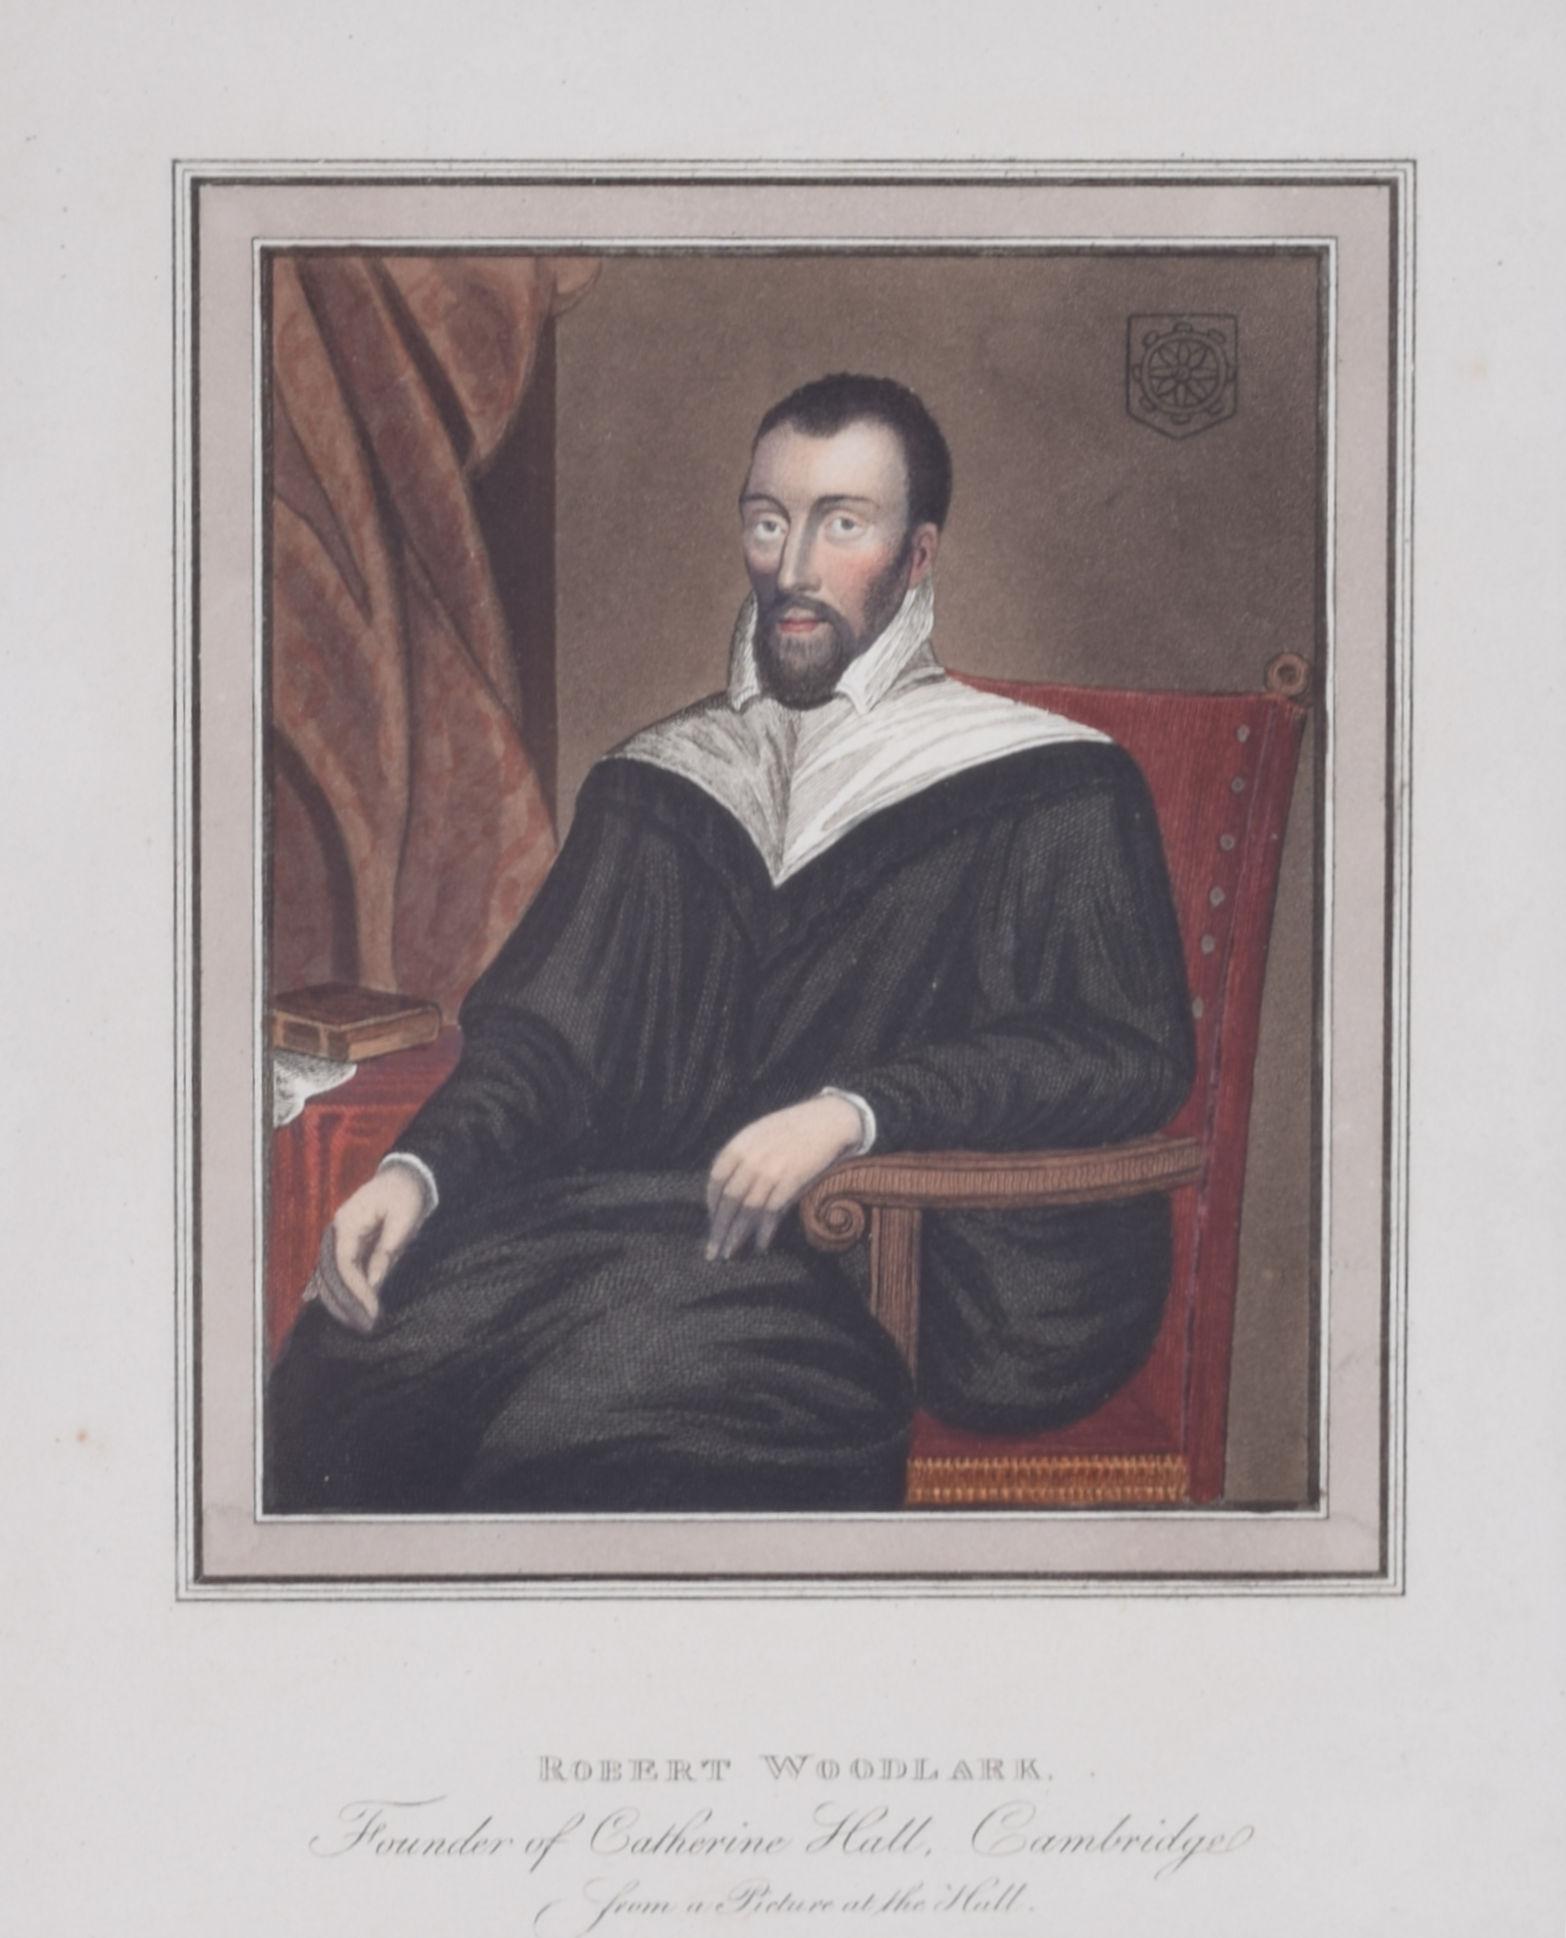 Robert Woodlark, St Catharine's College, Cambridge founder engravings - Print by Unknown